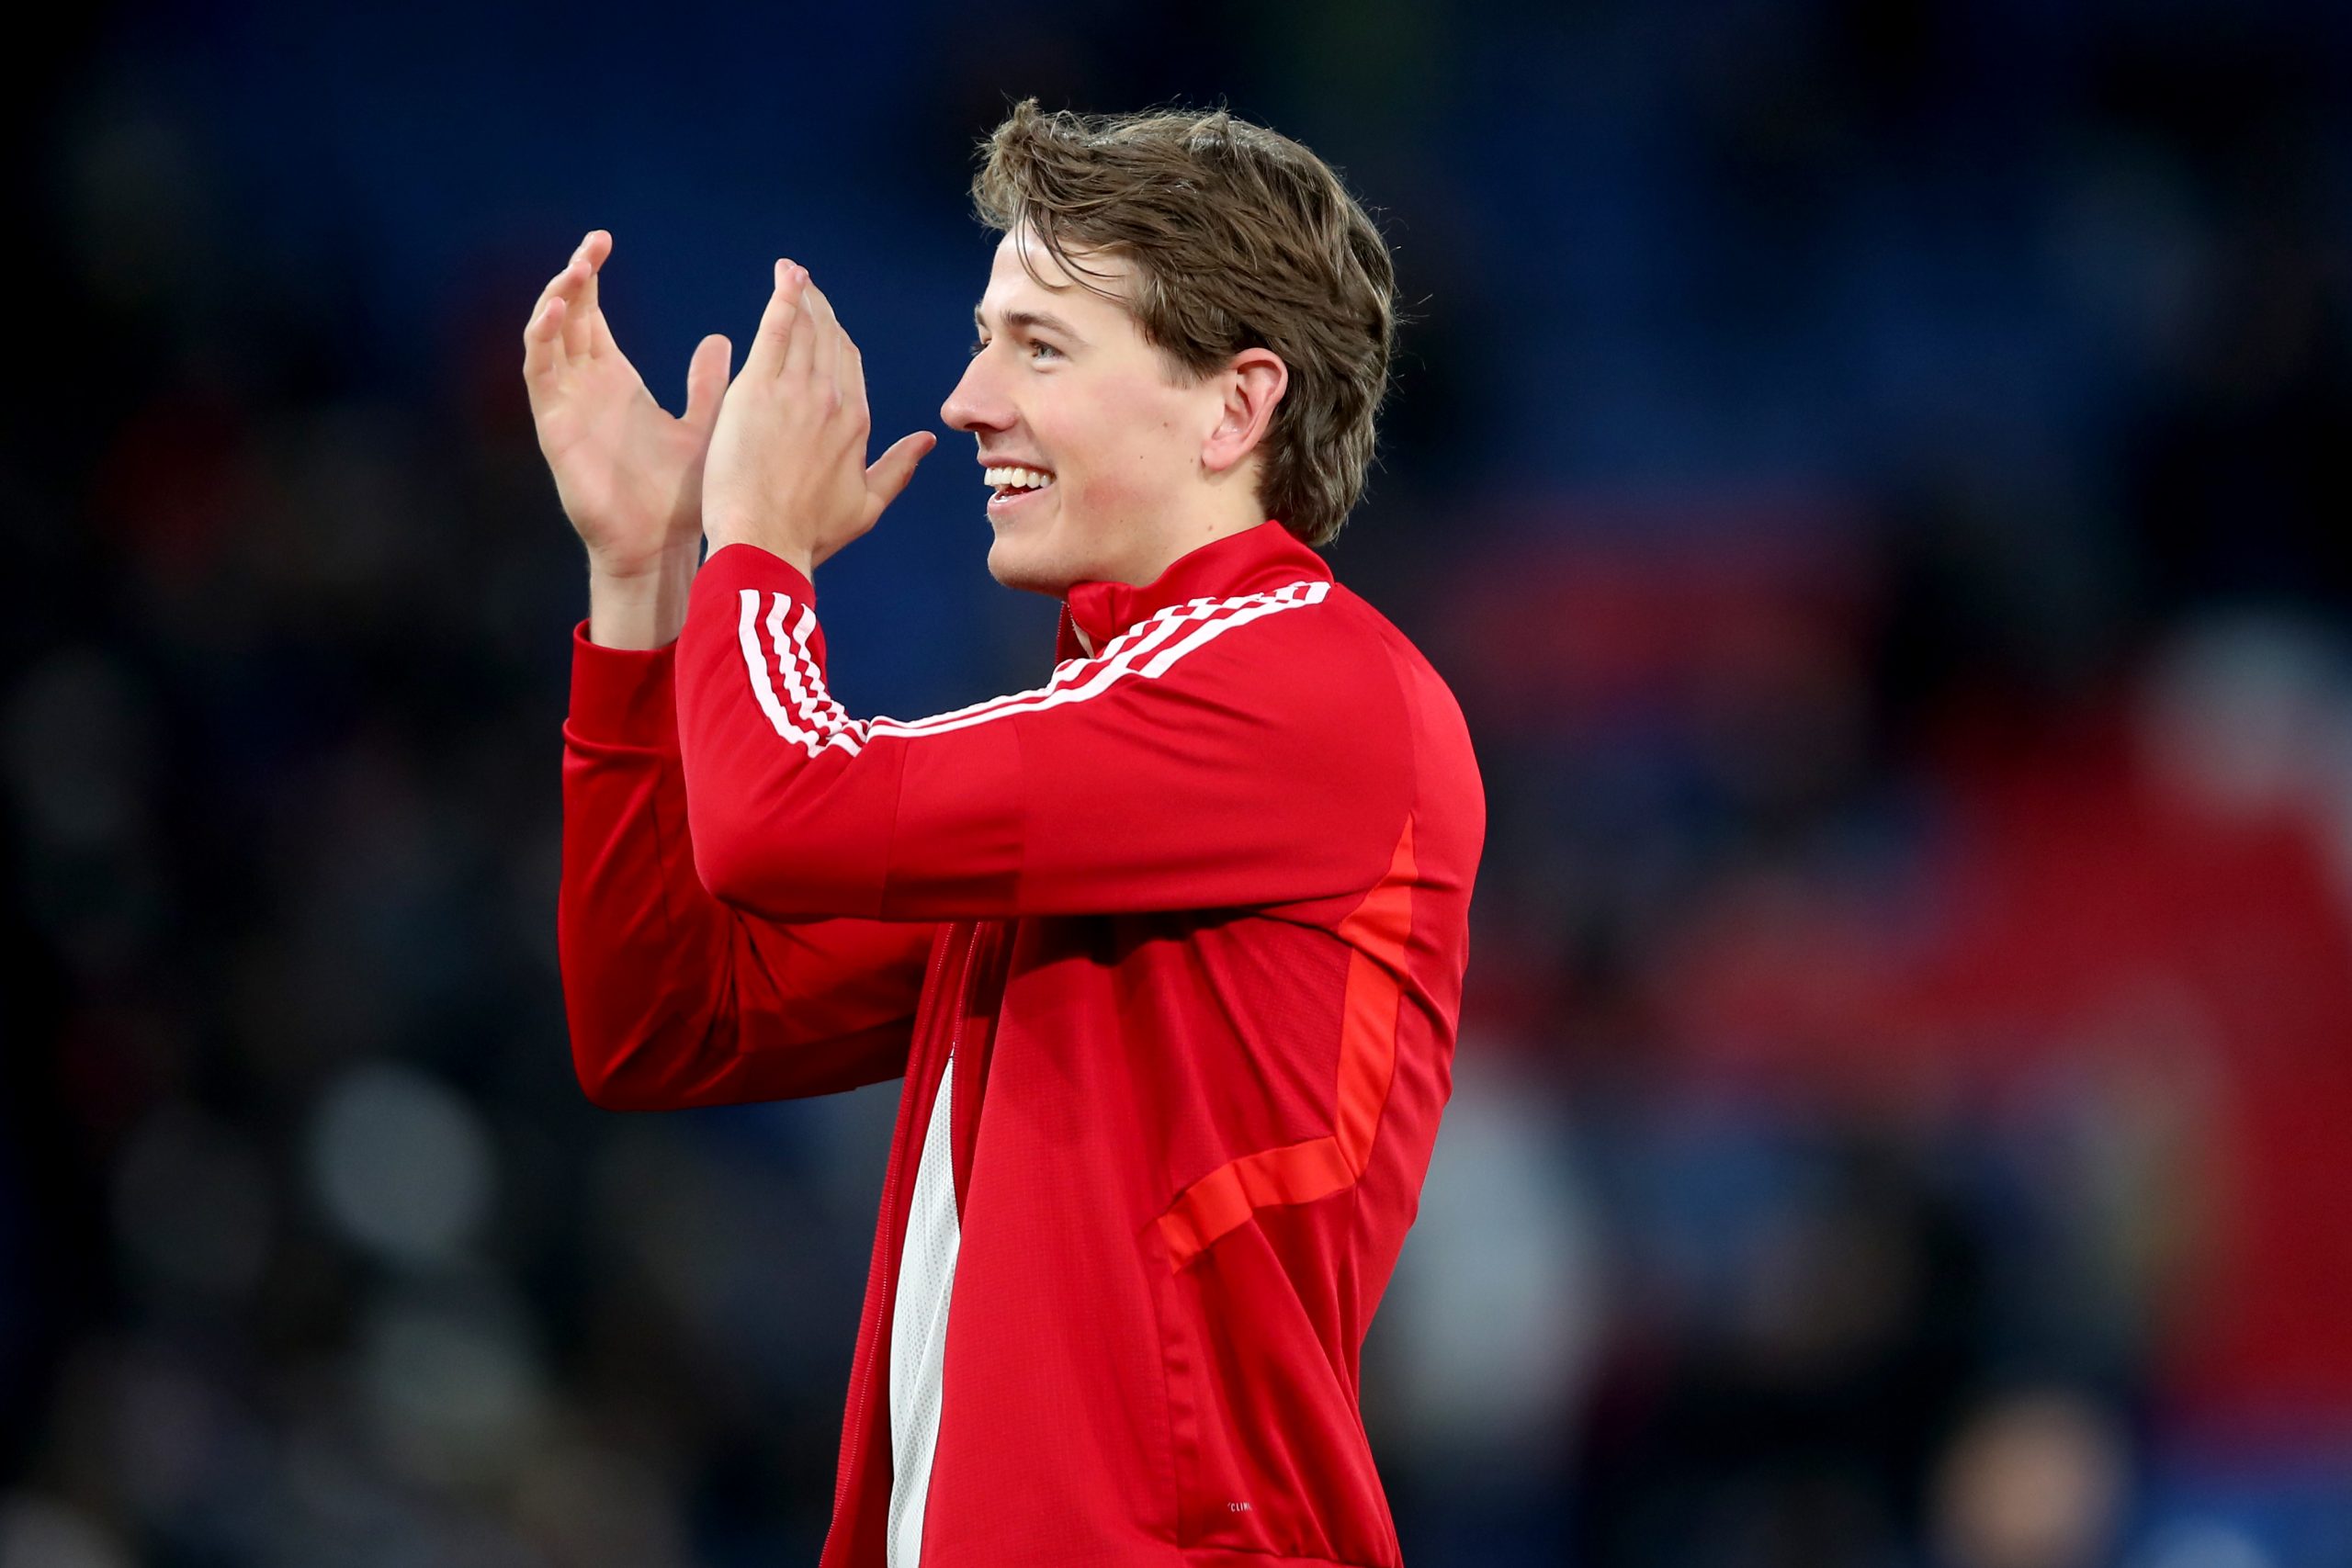 LONDON, ENGLAND - FEBRUARY 01: Sander Berge of Sheffield United during the Premier League match between Crystal Palace and Sheffield United at Selhurst Park on February 01, 2020 in London, United Kingdom. (Photo by Marc Atkins/Getty Images)